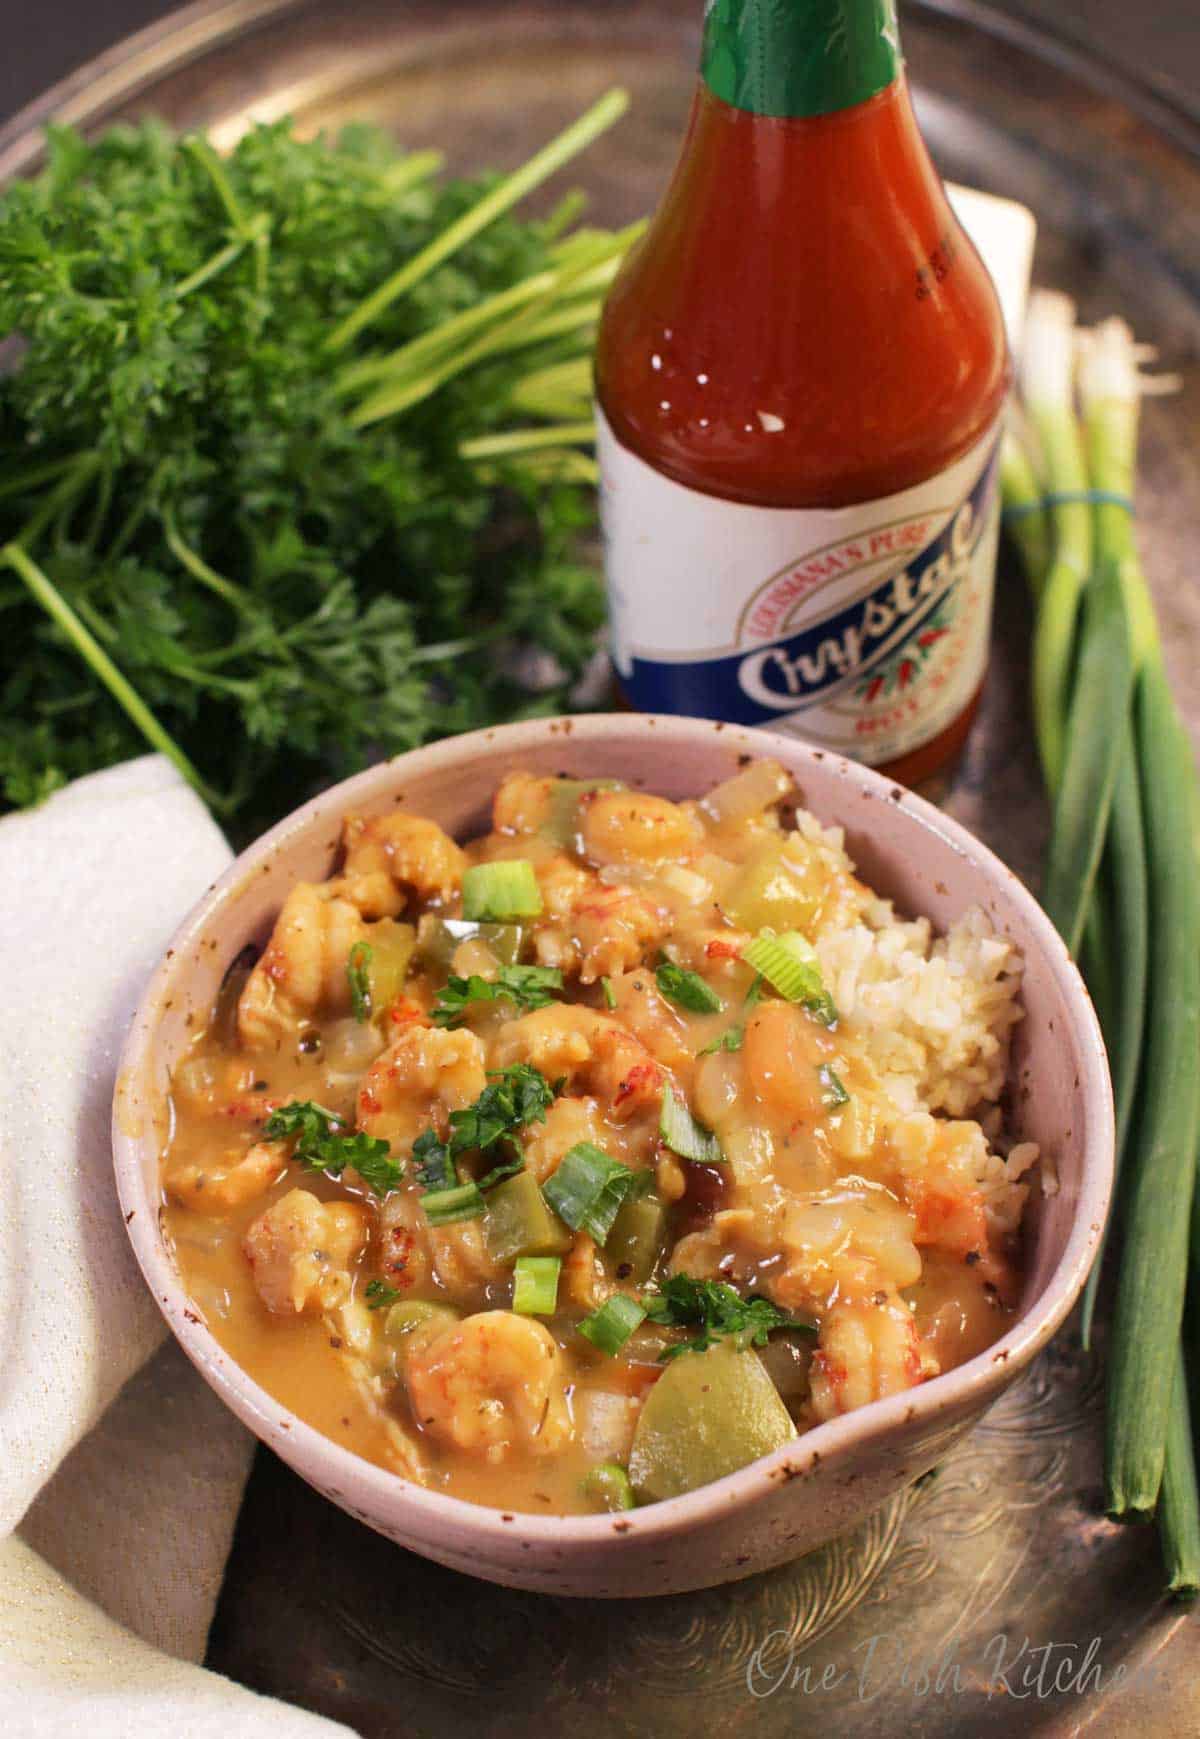 An overhead view of a bowl of crawfish Étouffée with white rice on a metal tray next to a bottle of Louisiana hot sauce and green onions